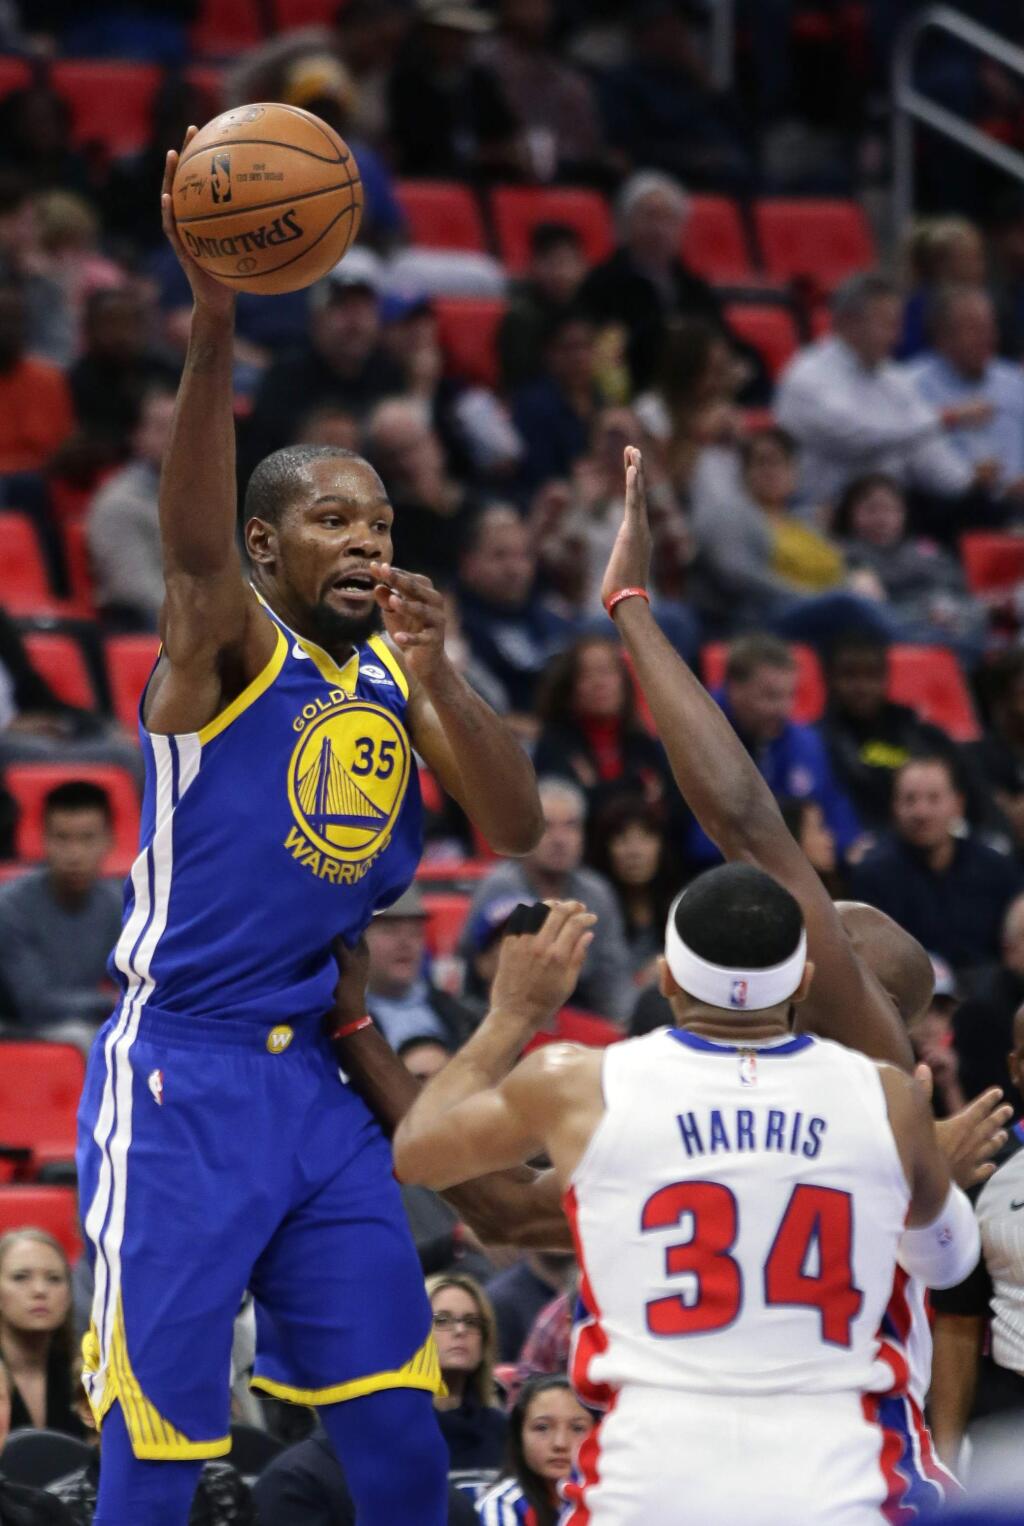 Golden State Warriors forward Kevin Durant (35) passes the ball over Detroit Pistons forward Tobias Harris (34) during the first quarter of an NBA basketball game Friday, Dec. 8, 2017, in Detroit. (AP Photo/Duane Burleson)